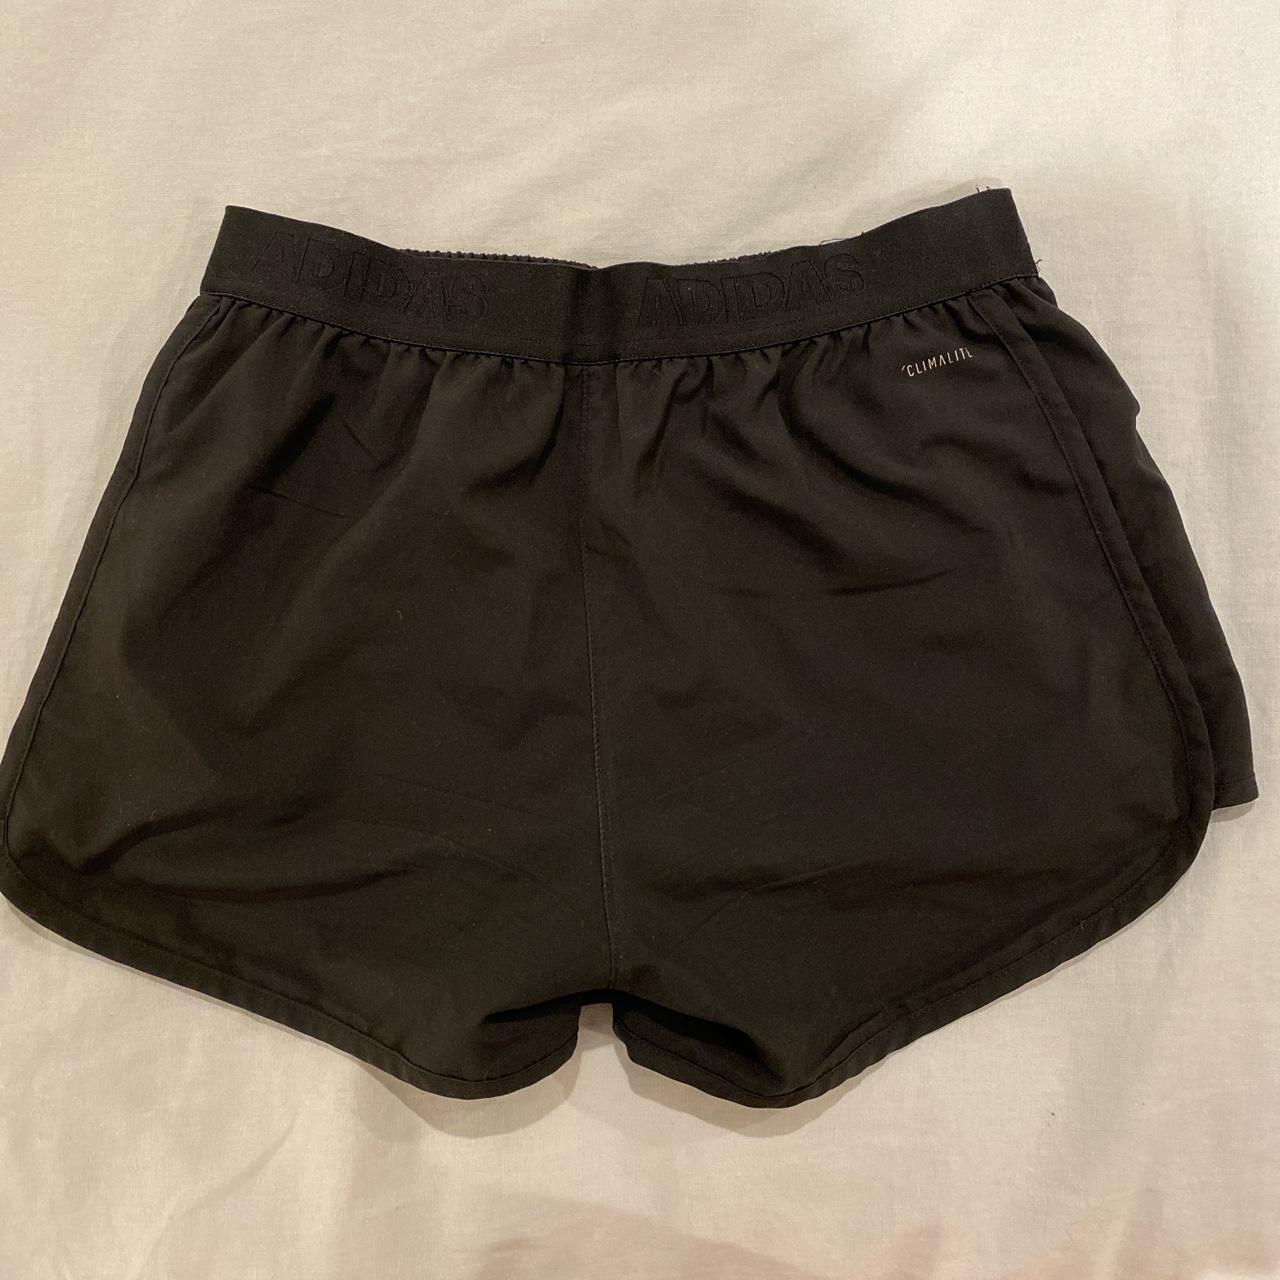 Great adidas fitness shorts for girls. Would fit a... - Depop